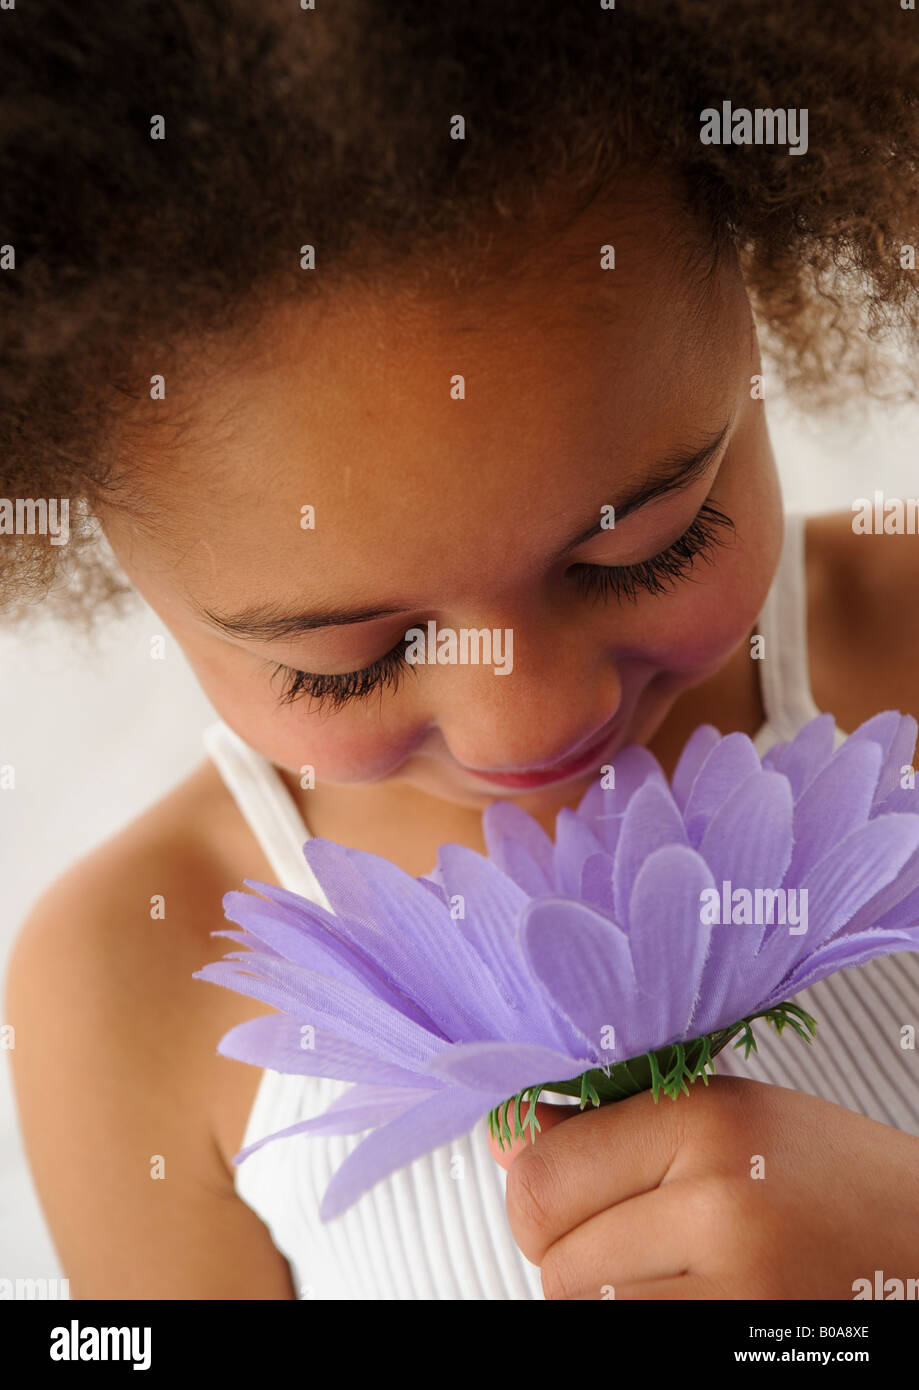 Closeup of a cutie girl in white slipover with Afro hairstyle appreciating  sweet scented fragrance in artificial gerbera flower Stock Photo - Alamy